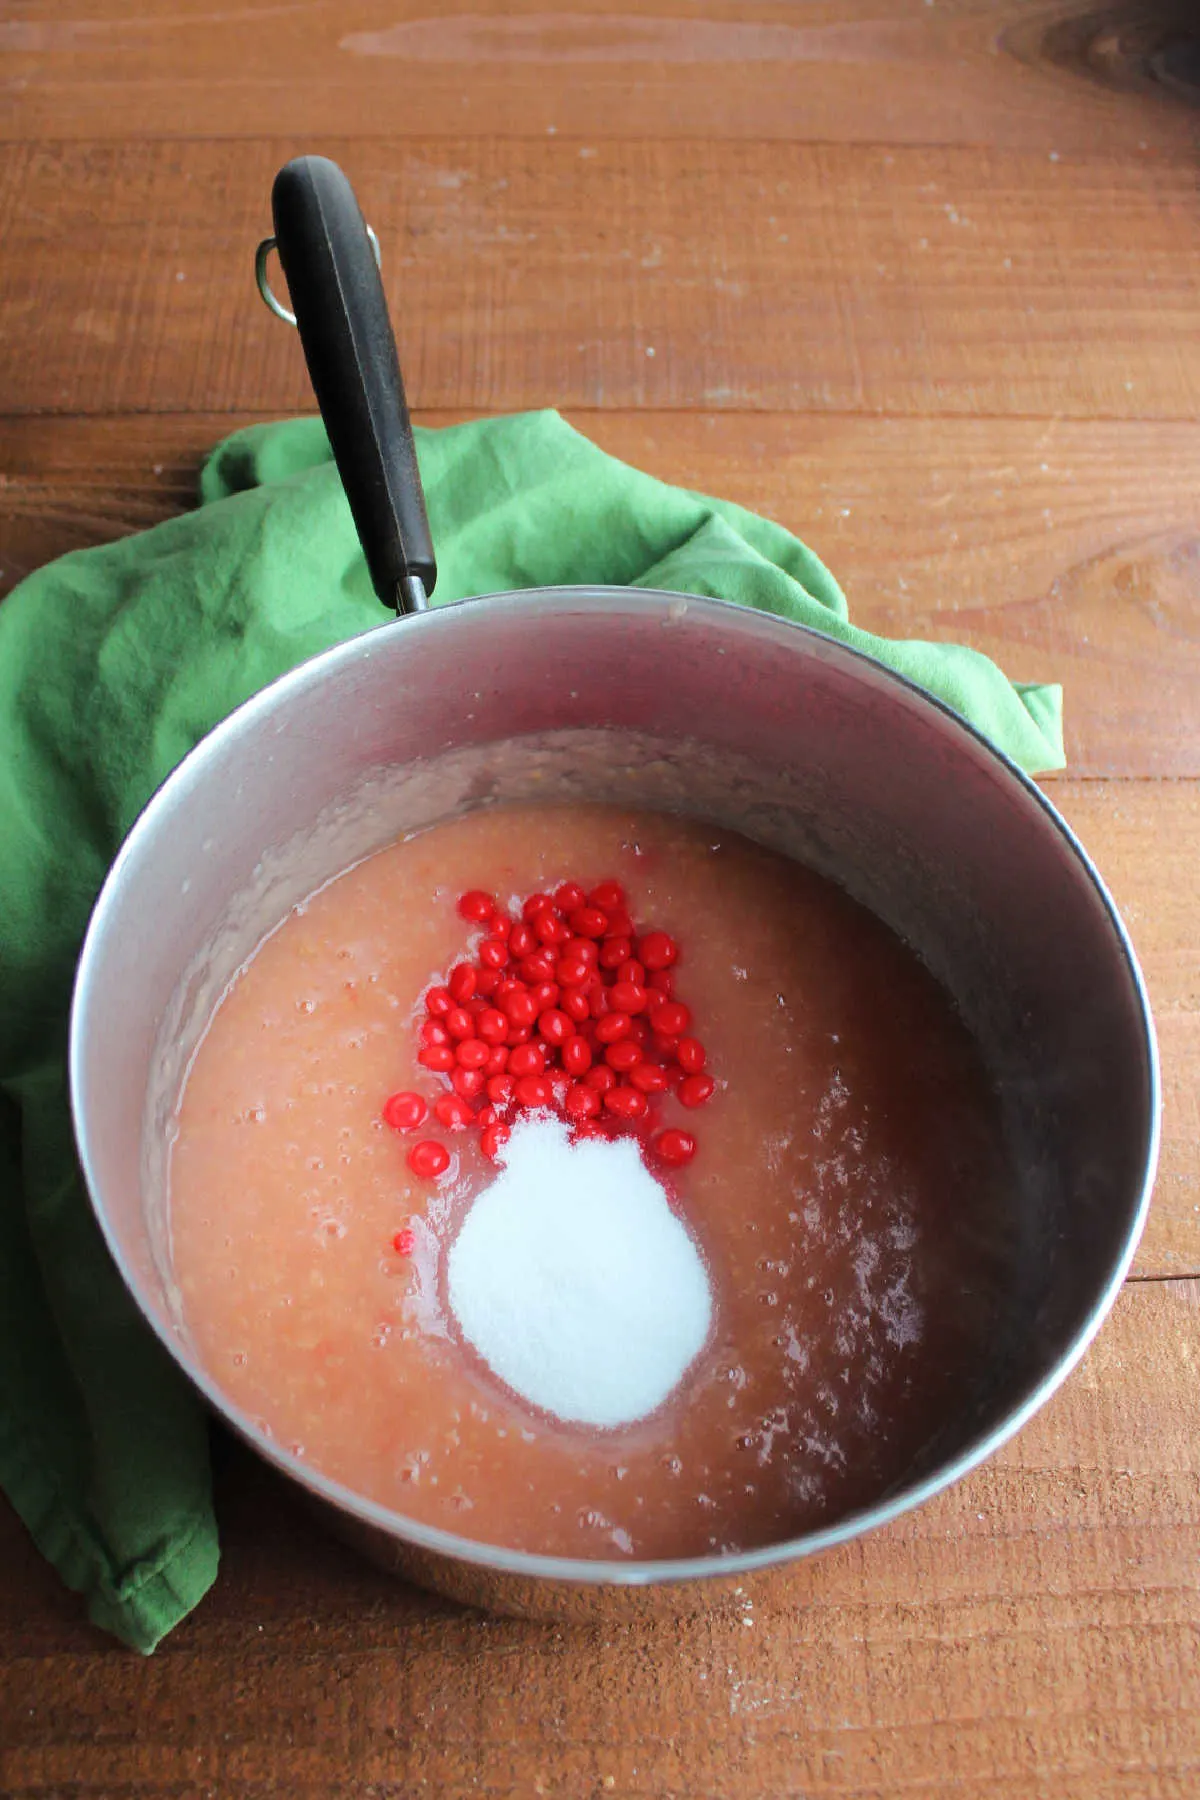 Adding sugar and Red Hot candies to saucepan of pink applesauce.